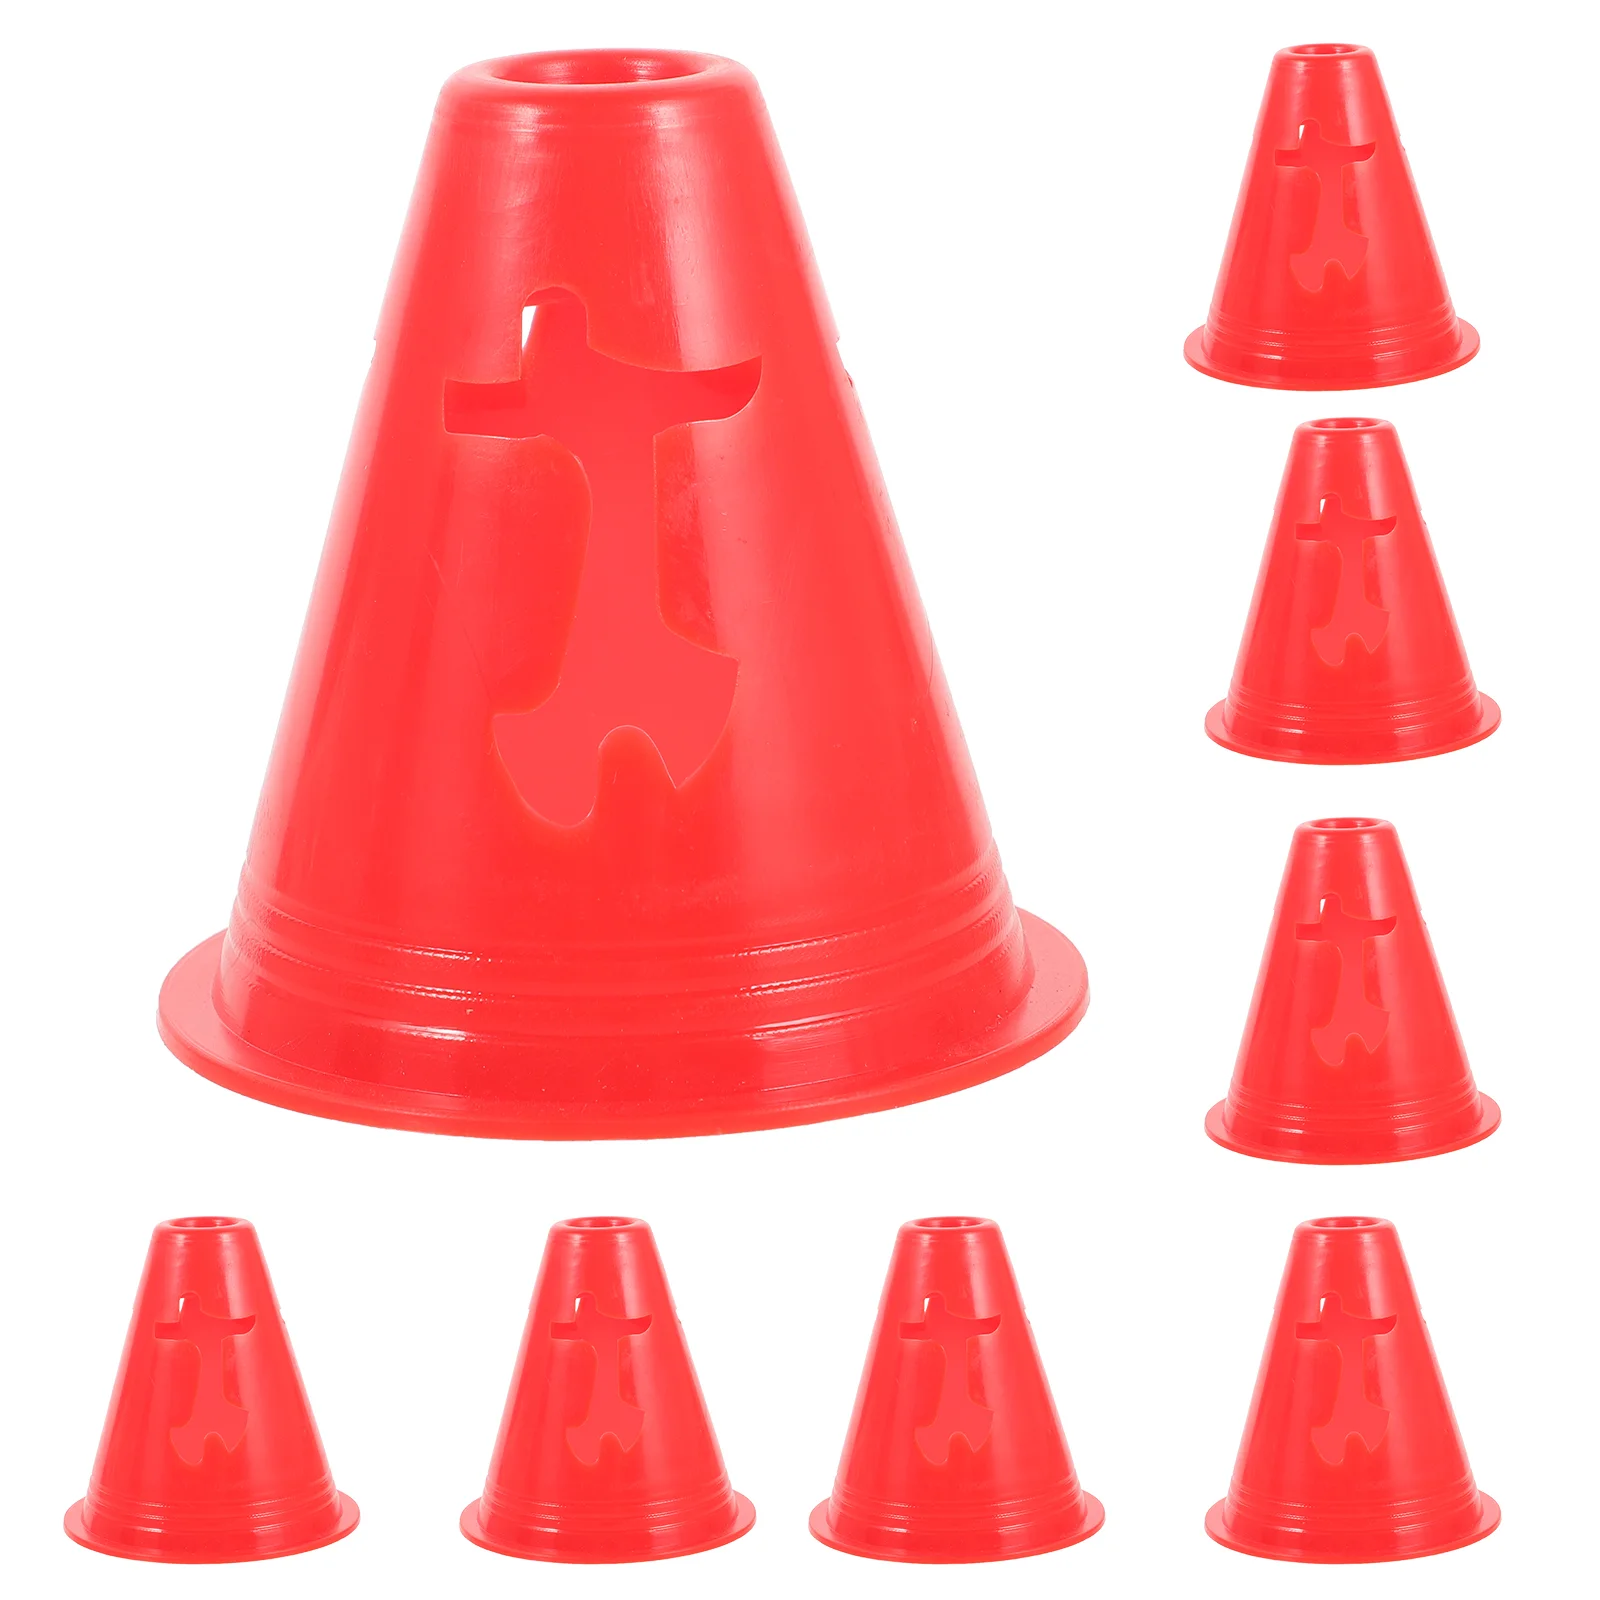 

10 Pcs Kids Football Play Cones Roller Skating Sports Small Traffic Soccer Practice Numbered Markers Child Classroom